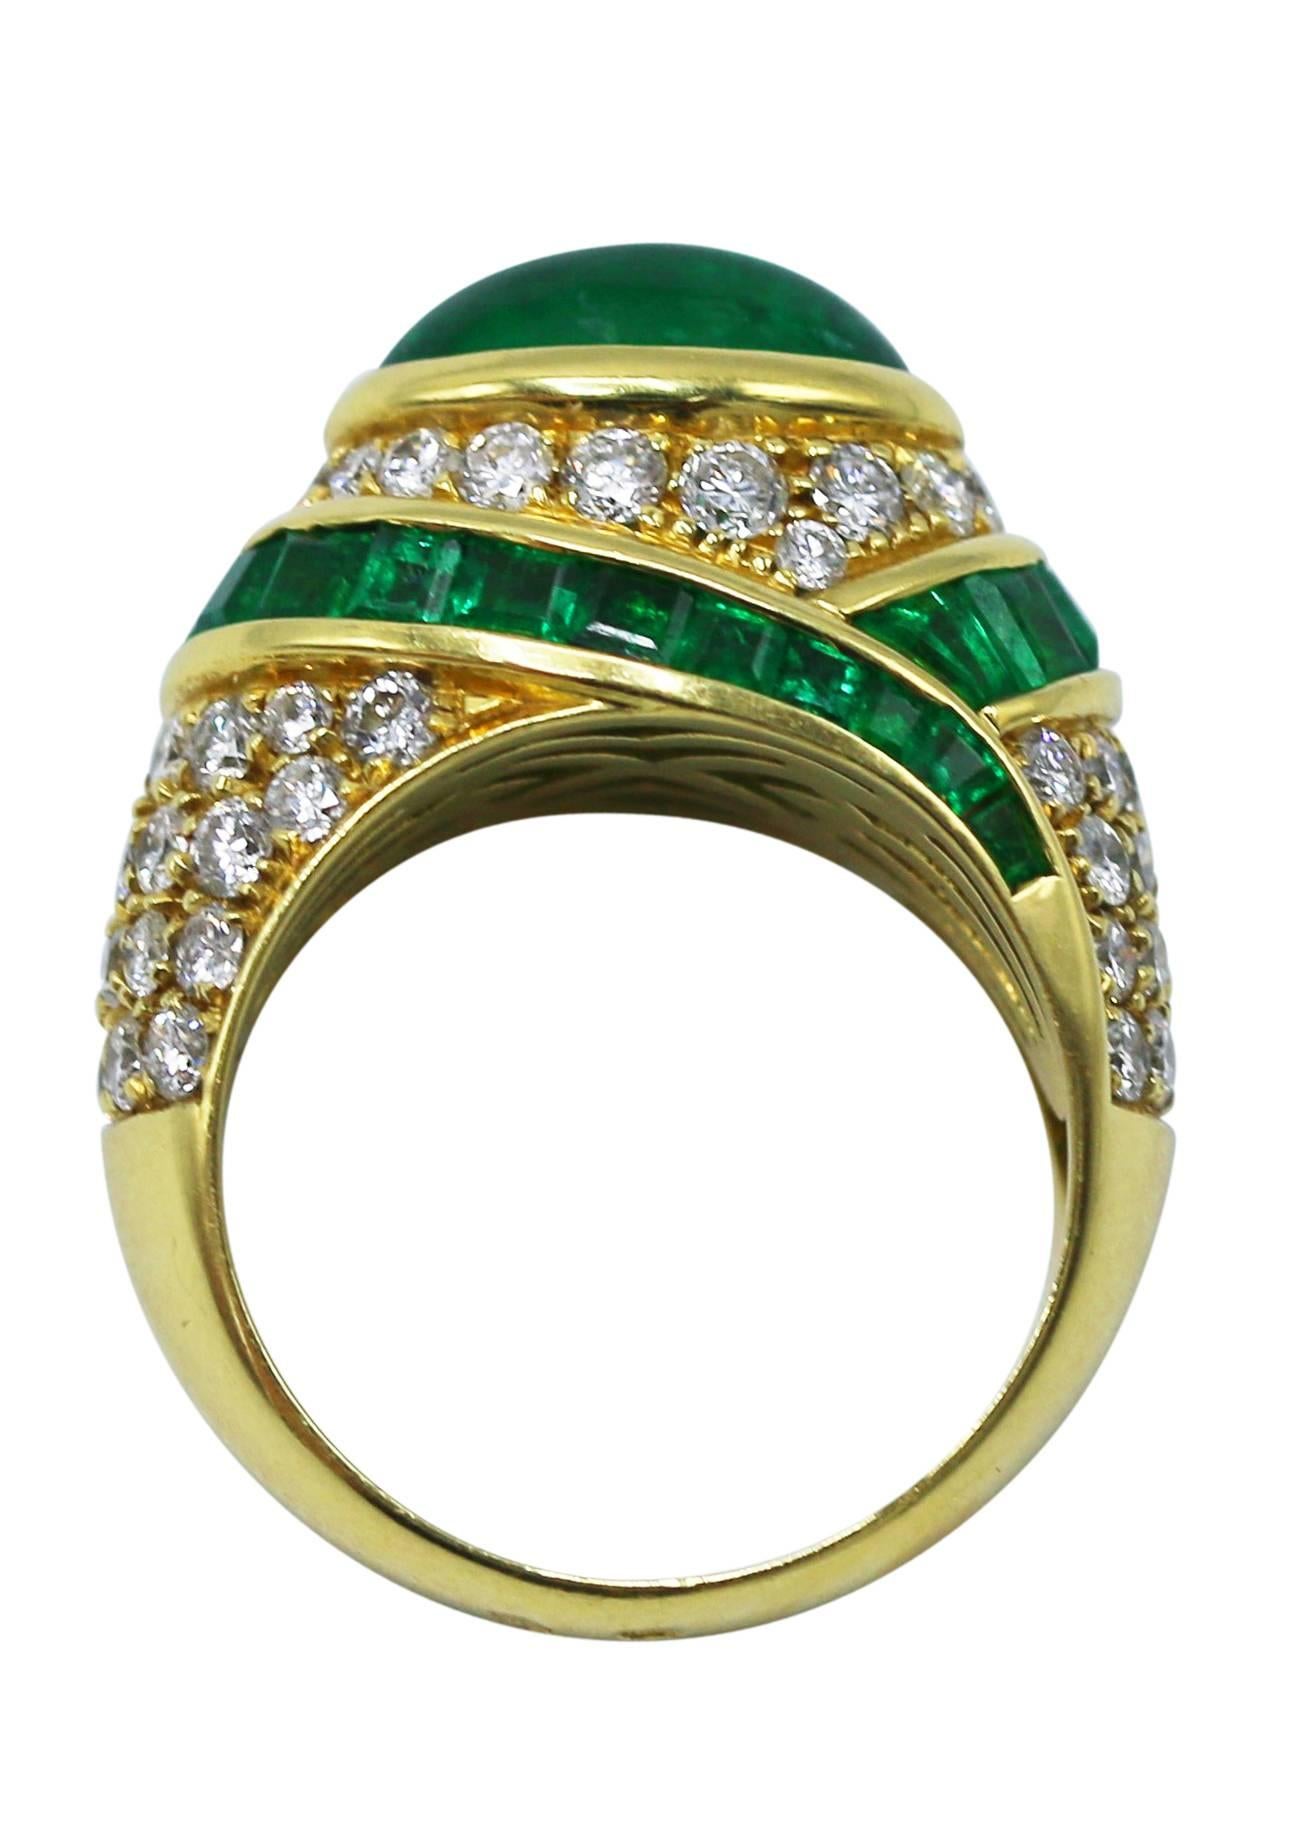 Women's or Men's Chaumet Emerald and Diamond Ring